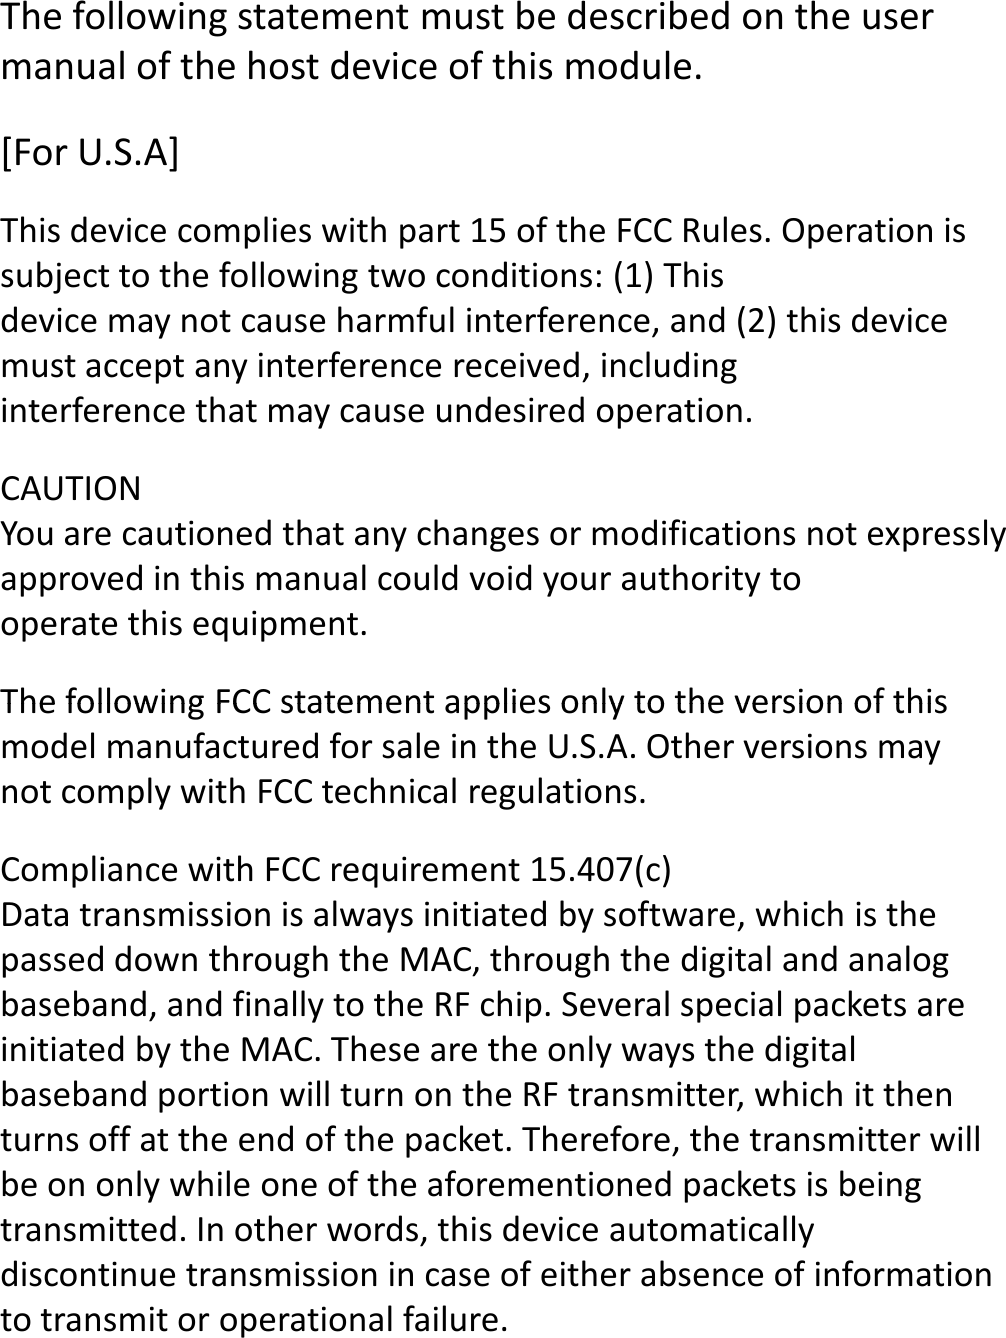 [For U.S.A]This device complies with part 15 of the FCC Rules. Operation is subject to the following two conditions: (1) Thisdevice may not cause harmful interference, and (2) this device must accept any interference received, includinginterference that may cause undesired operation.CAUTIONYou are cautioned that any changes or modifications not expressly approved in this manual could void your authority tooperate this equipment.The following FCC statement applies only to the version of this The following statement must be described on the user manual of the host device of this module.The following FCC statement applies only to the version of this model manufactured for sale in the U.S.A. Other versions may not comply with FCC technical regulations.Compliance with FCC requirement 15.407(c)Data transmission is always initiated by software, which is the passed down through the MAC, through the digital and analog baseband, and finally to the RF chip. Several special packets are initiated by the MAC. These are the only ways the digital baseband portion will turn on the RF transmitter, which it then turns off at the end of the packet. Therefore, the transmitter will be on only while one of the aforementioned packets is being transmitted. In other words, this device automatically discontinue transmission in case of either absence of information to transmit or operational failure.